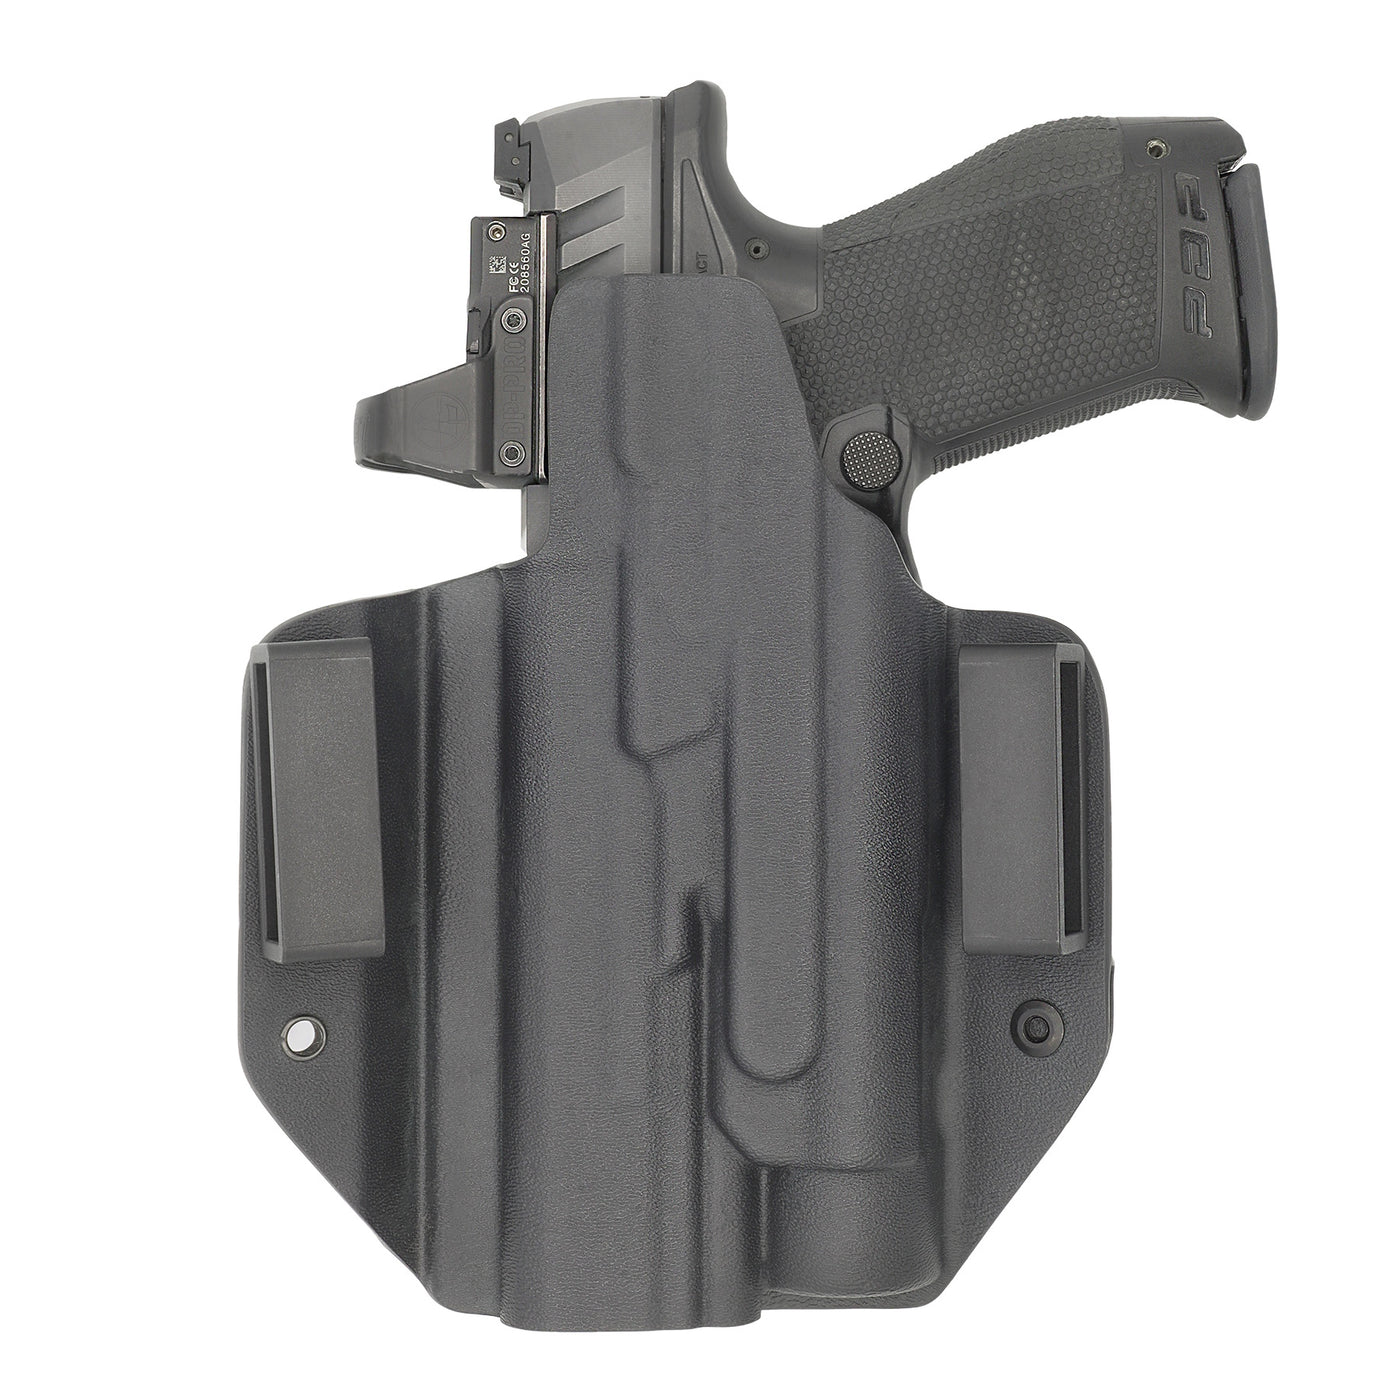 C&G Holsters Quickship OWB Tactical Walther PDP Streamlight TLR1 in holstered position back view